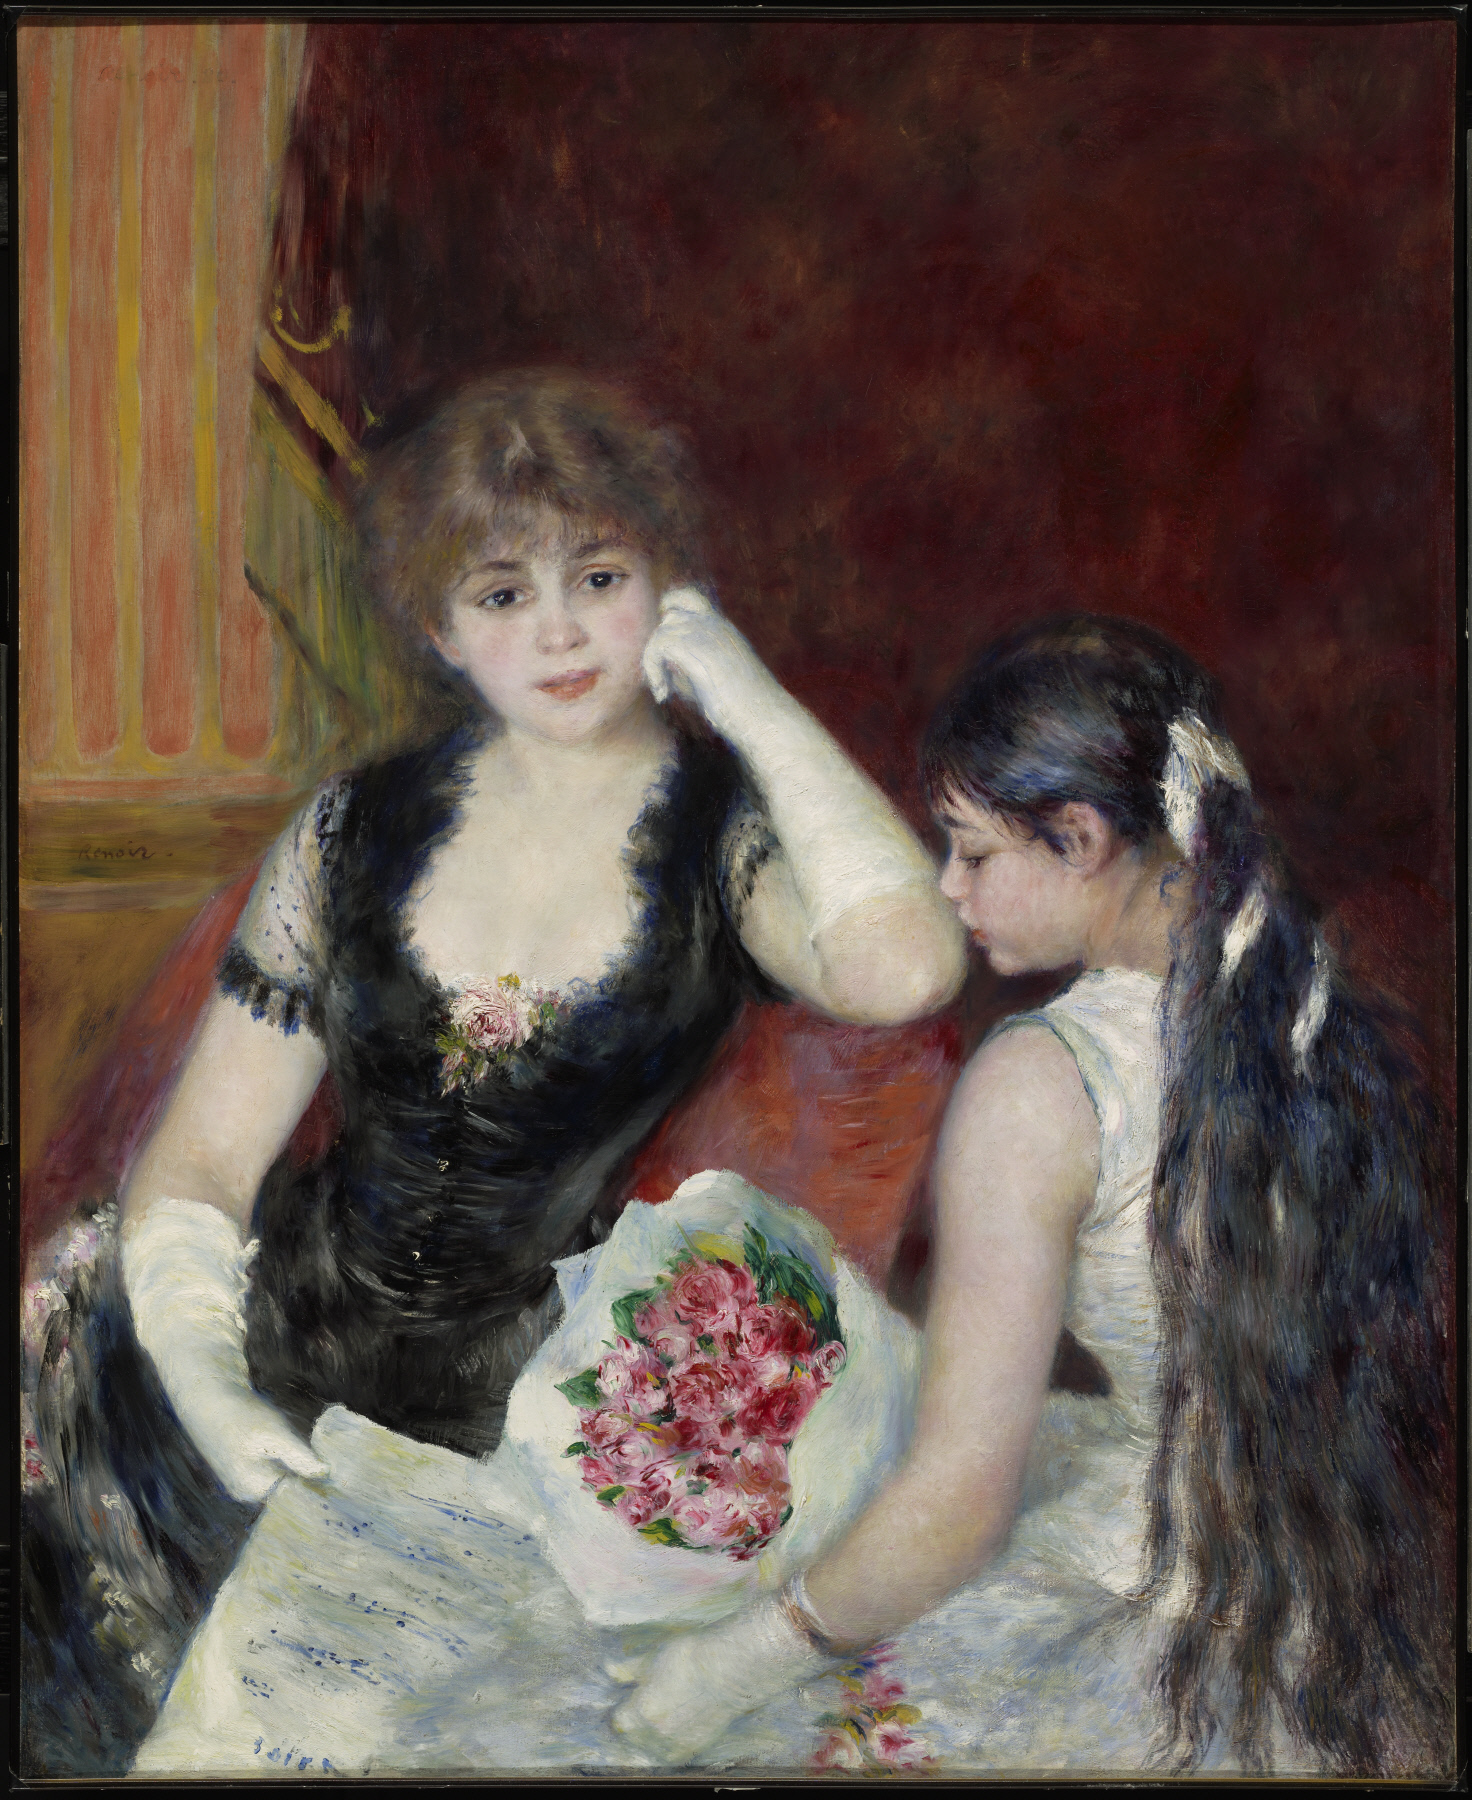 A box at the theater (At the concert) by Pierre-Auguste Renoir - 1880 - 99.4 x 80.7 cm The Clark